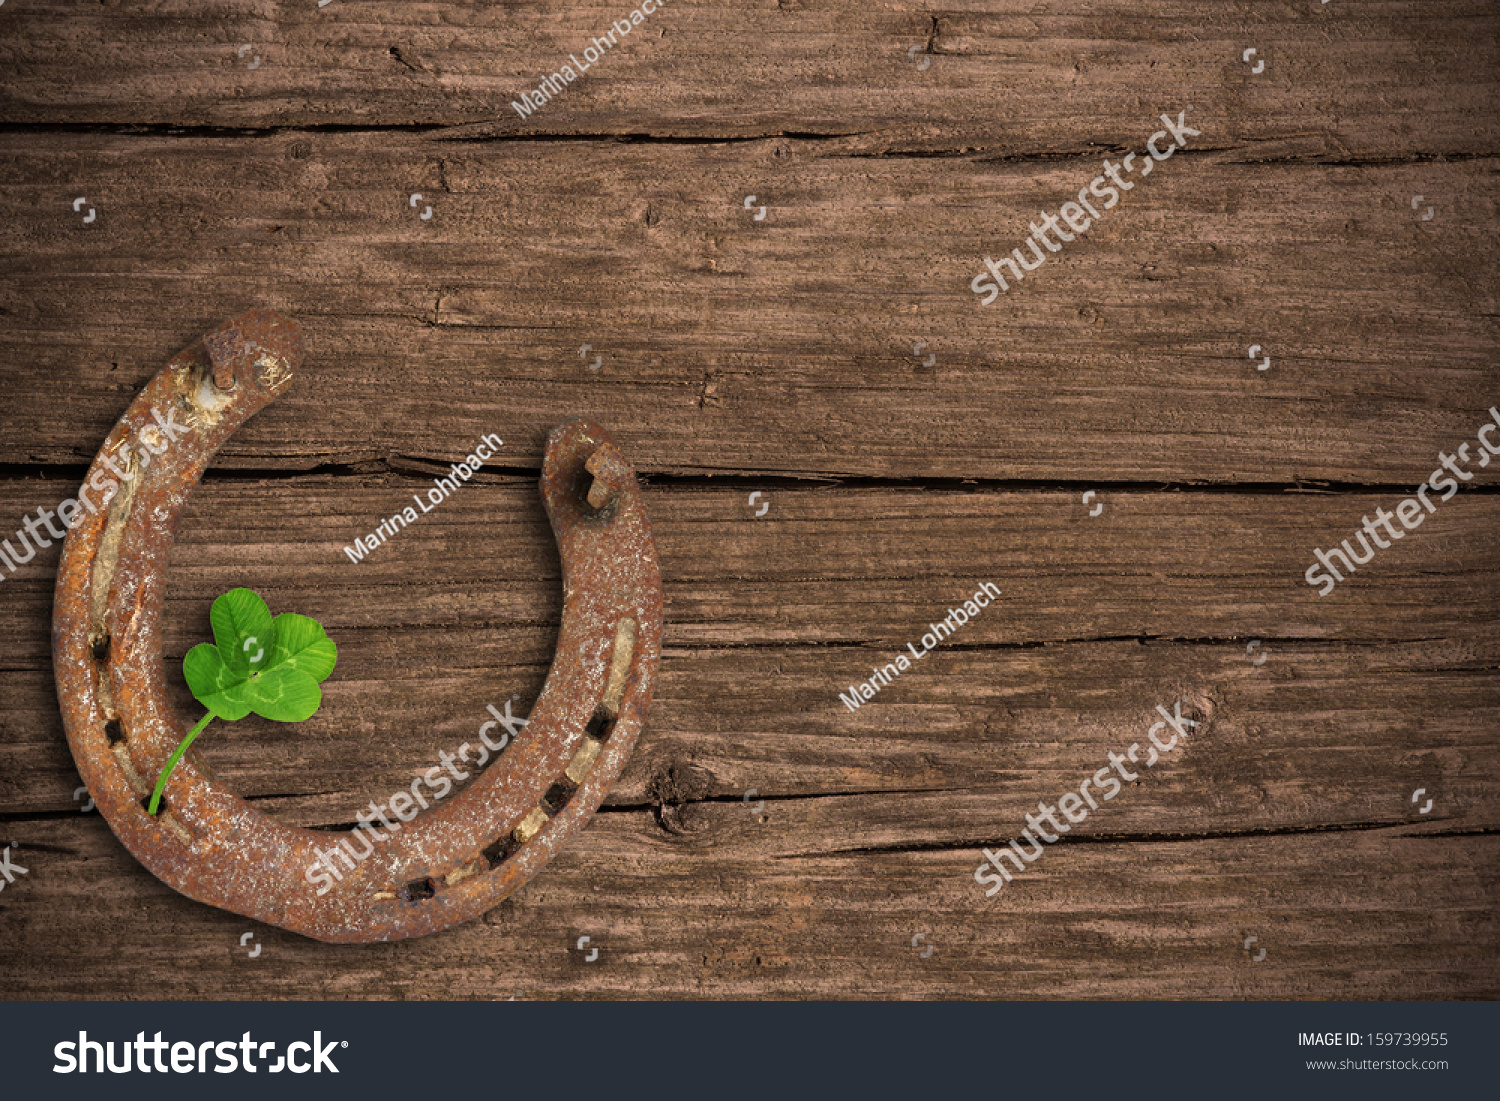 Blackboard with four-leaved clover and a horse shoe #159739955